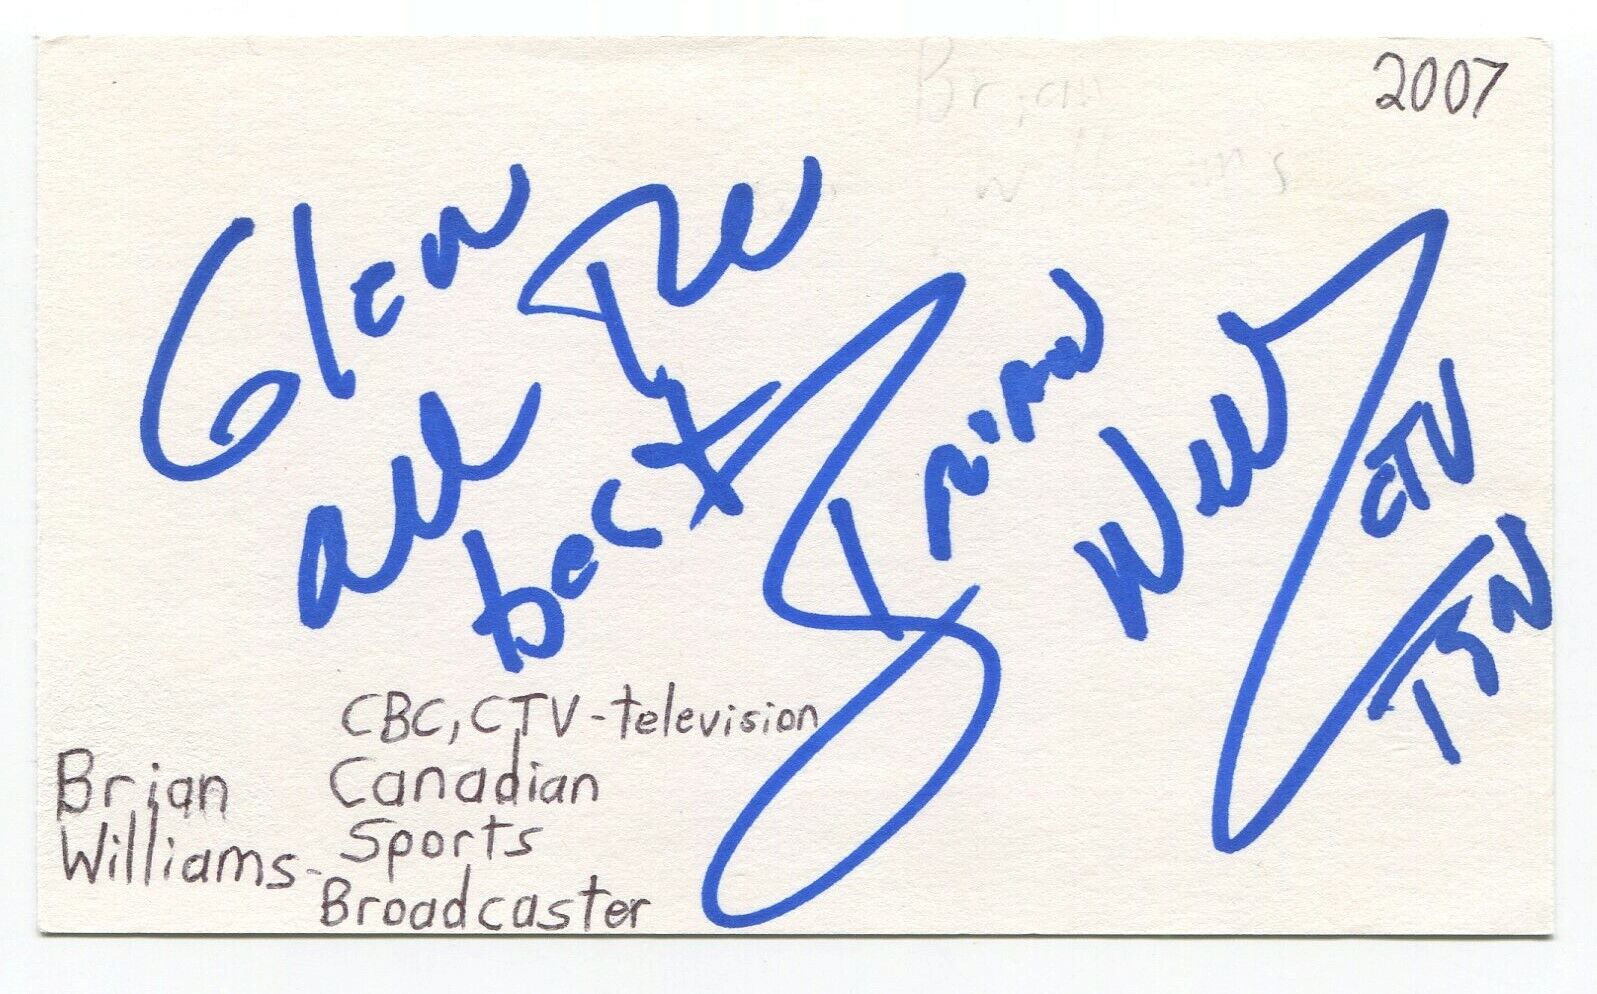 Brian Williams Signed 3x5 Index Card Autographed Canadian Sportscaster Olympics